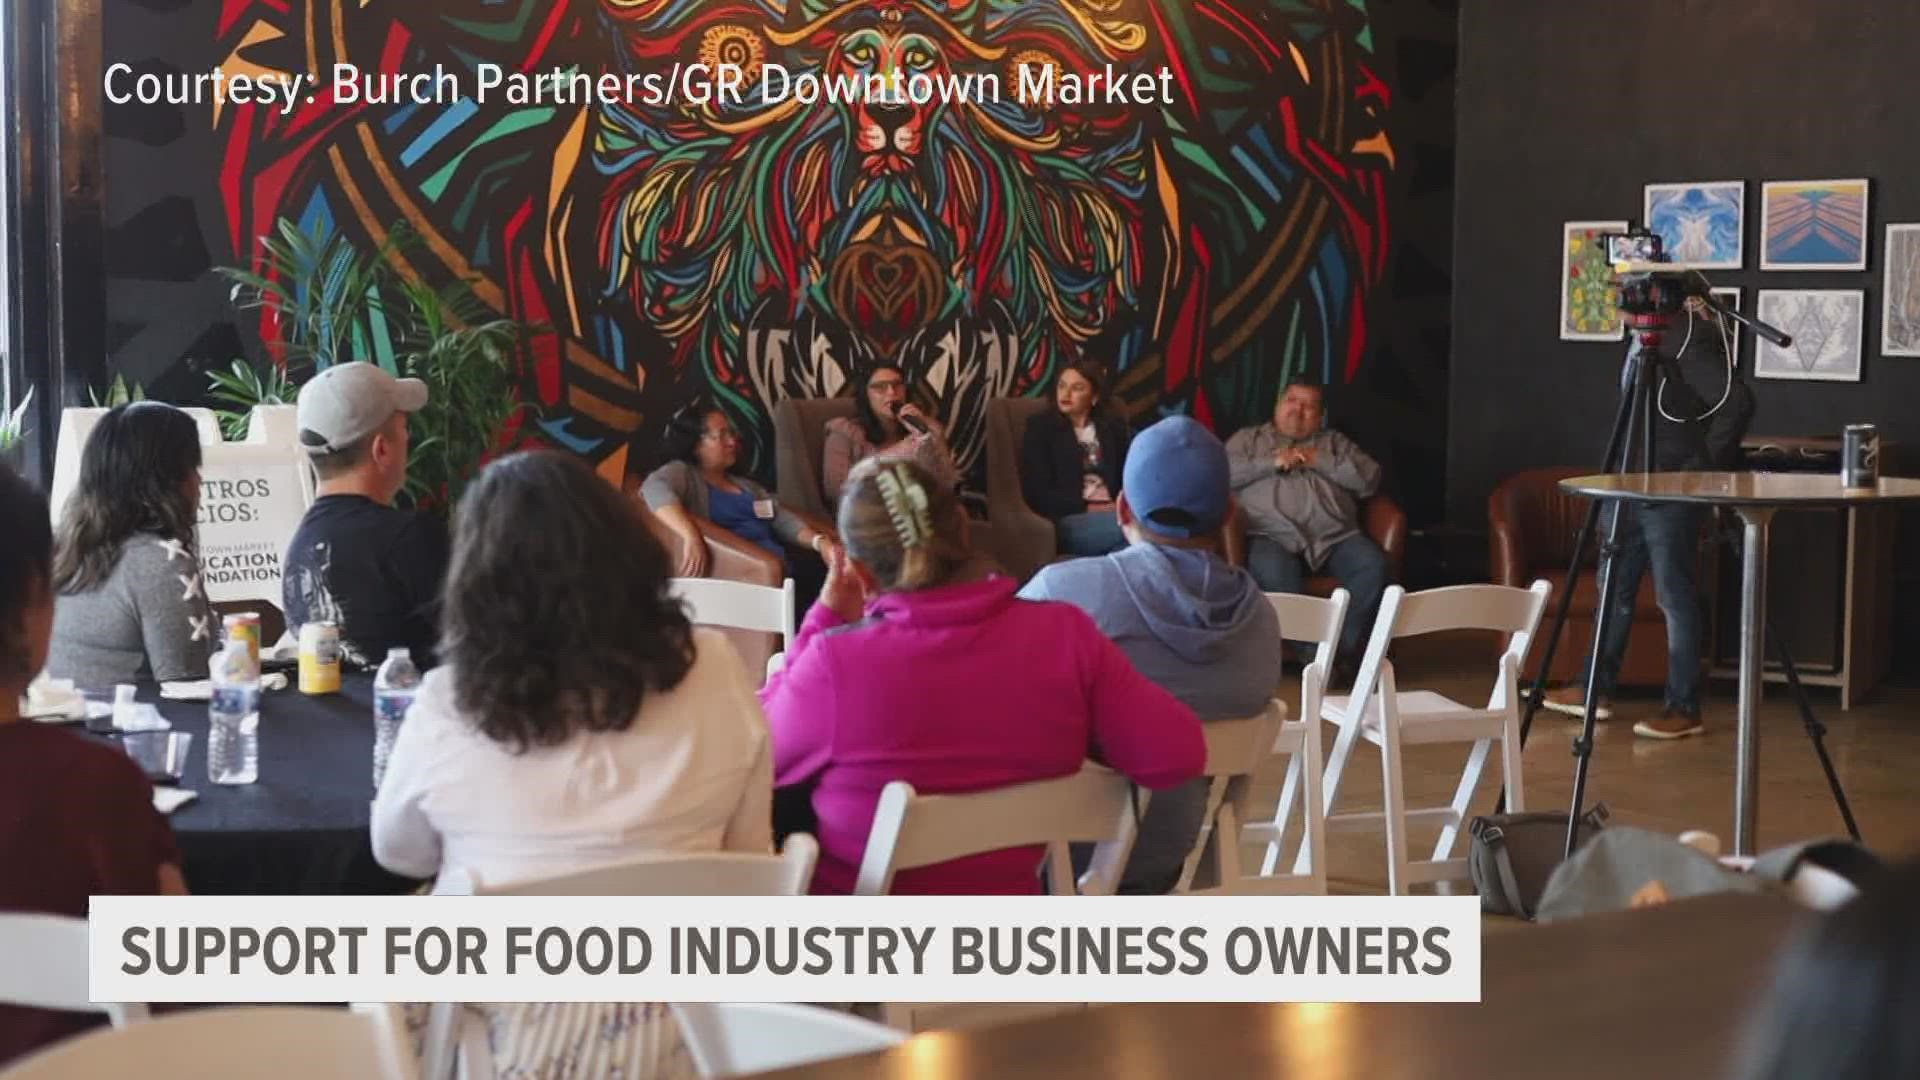 This was the first Culinary Conversations event held by the Downtown Market where the panel was a Spanish language discussion.